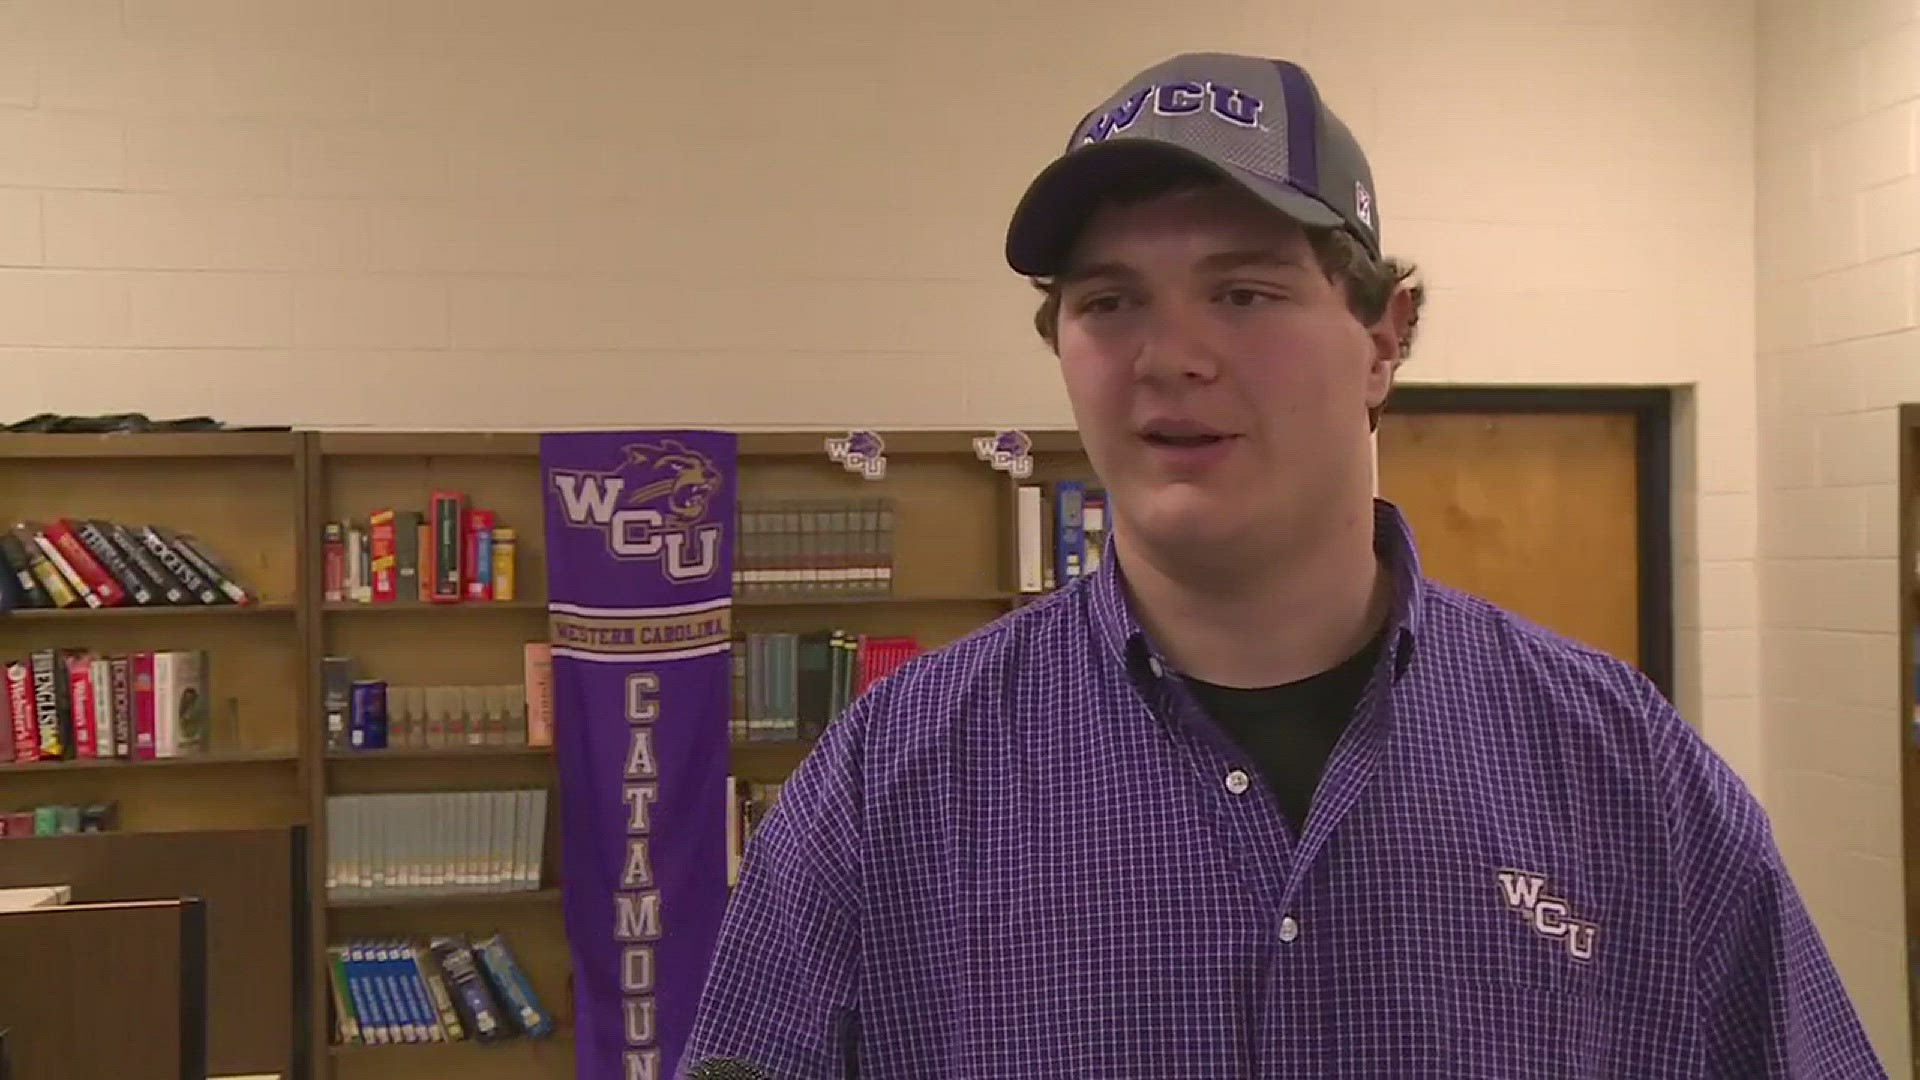 Bailey Byrum of Sweetwater will play football at Western Carolina